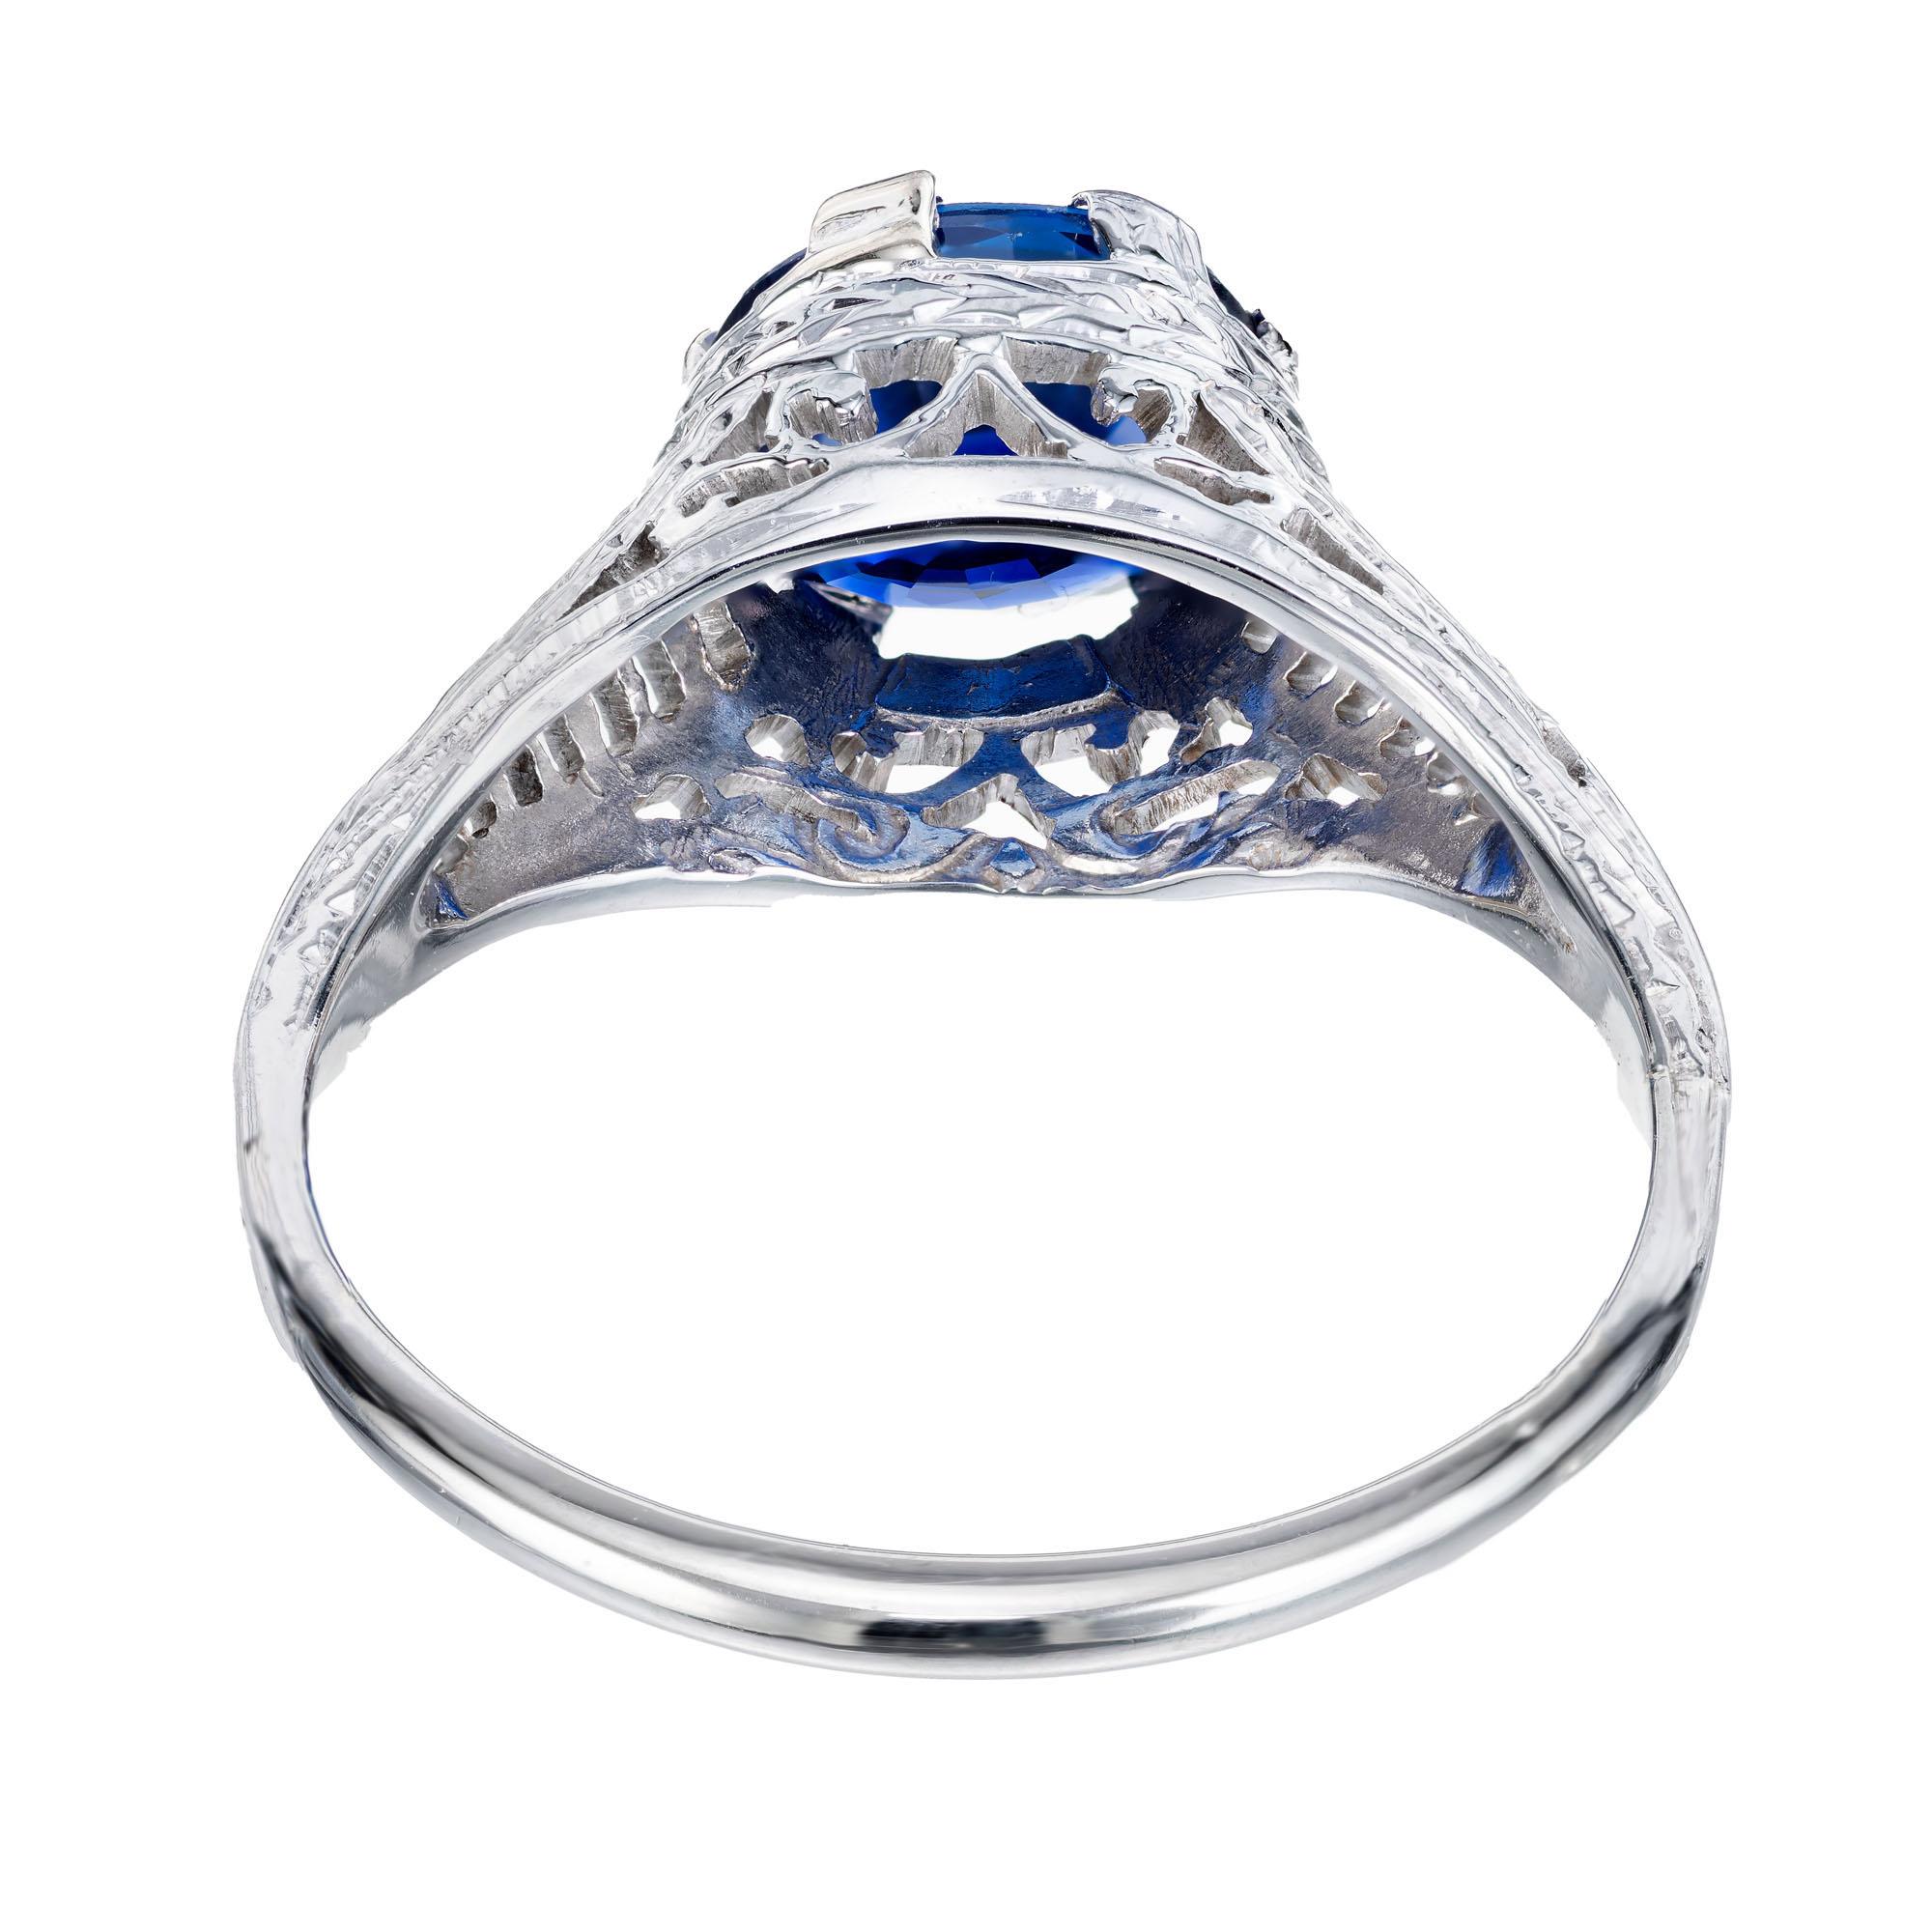 GIA Certified 1.77 Carat Oval Sapphire Gold Filigree Art Deco Engagement Ring In Good Condition For Sale In Stamford, CT